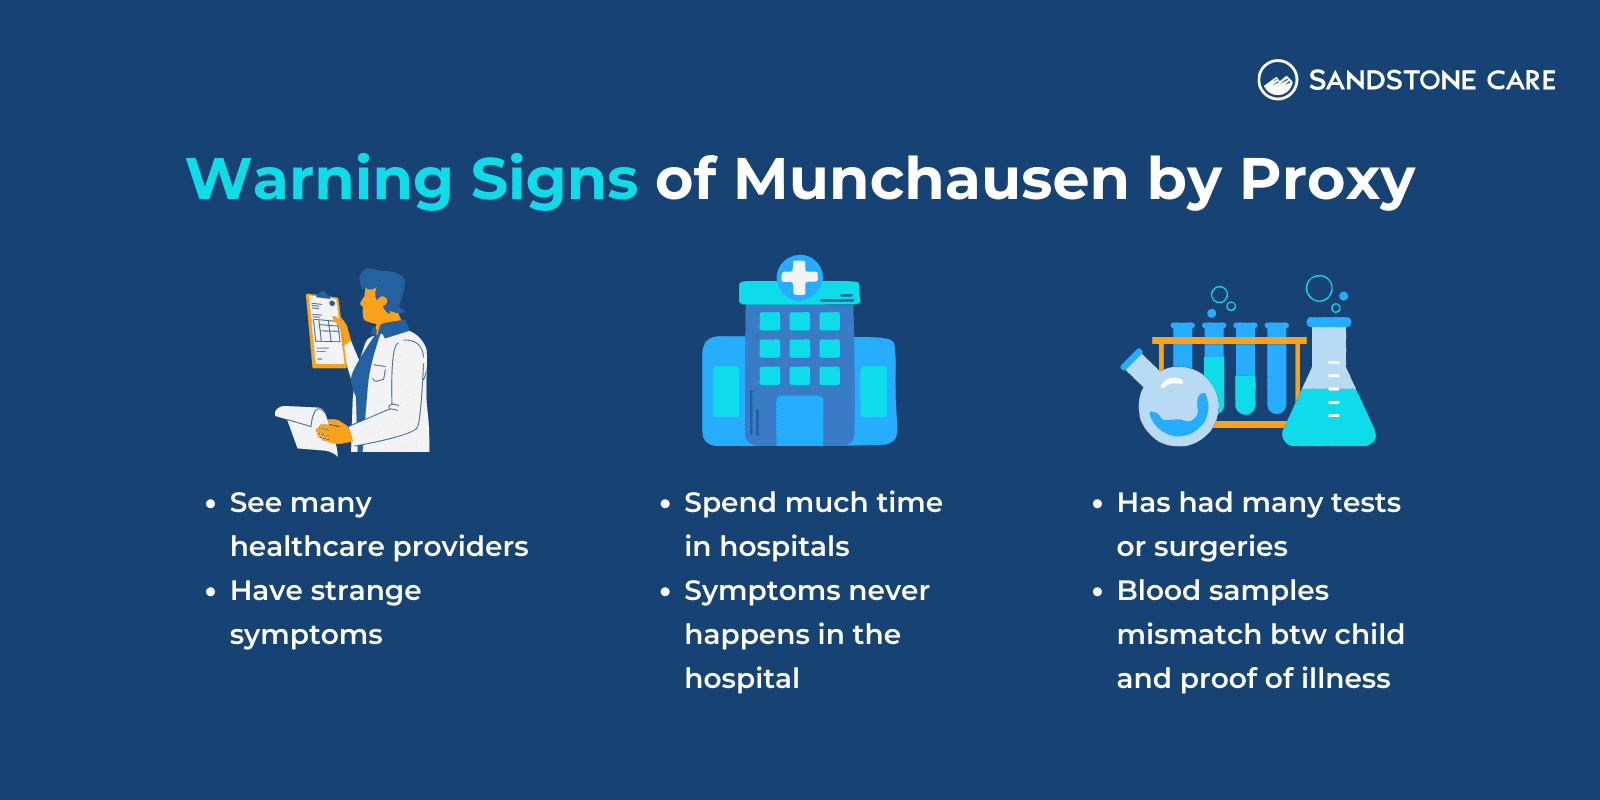 "Warning Signs Of Munchausen By Proxy" and a list of warning signs with relevant icons like healthcare provider illustration, hospital illustration, and an illustration of scientific vials